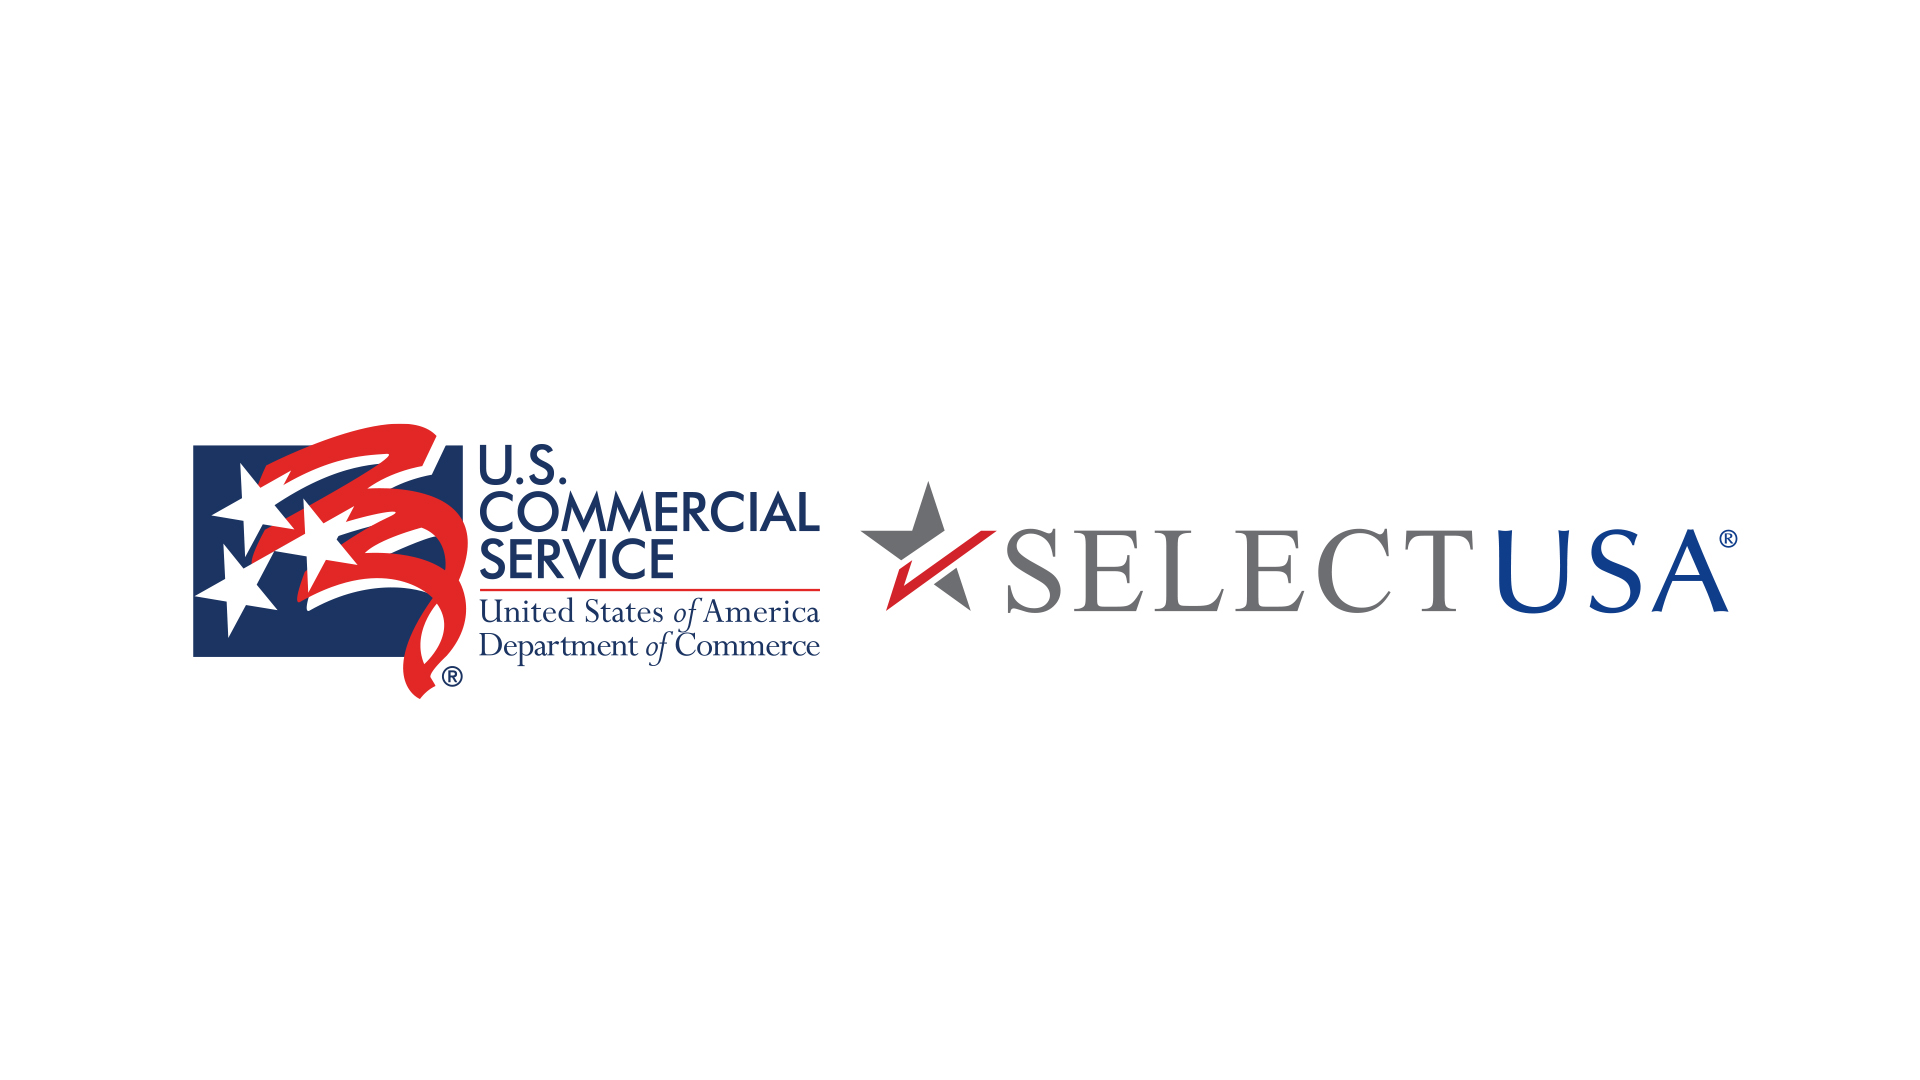 The full color Commercial Service logo and the Select USA logo on a white background